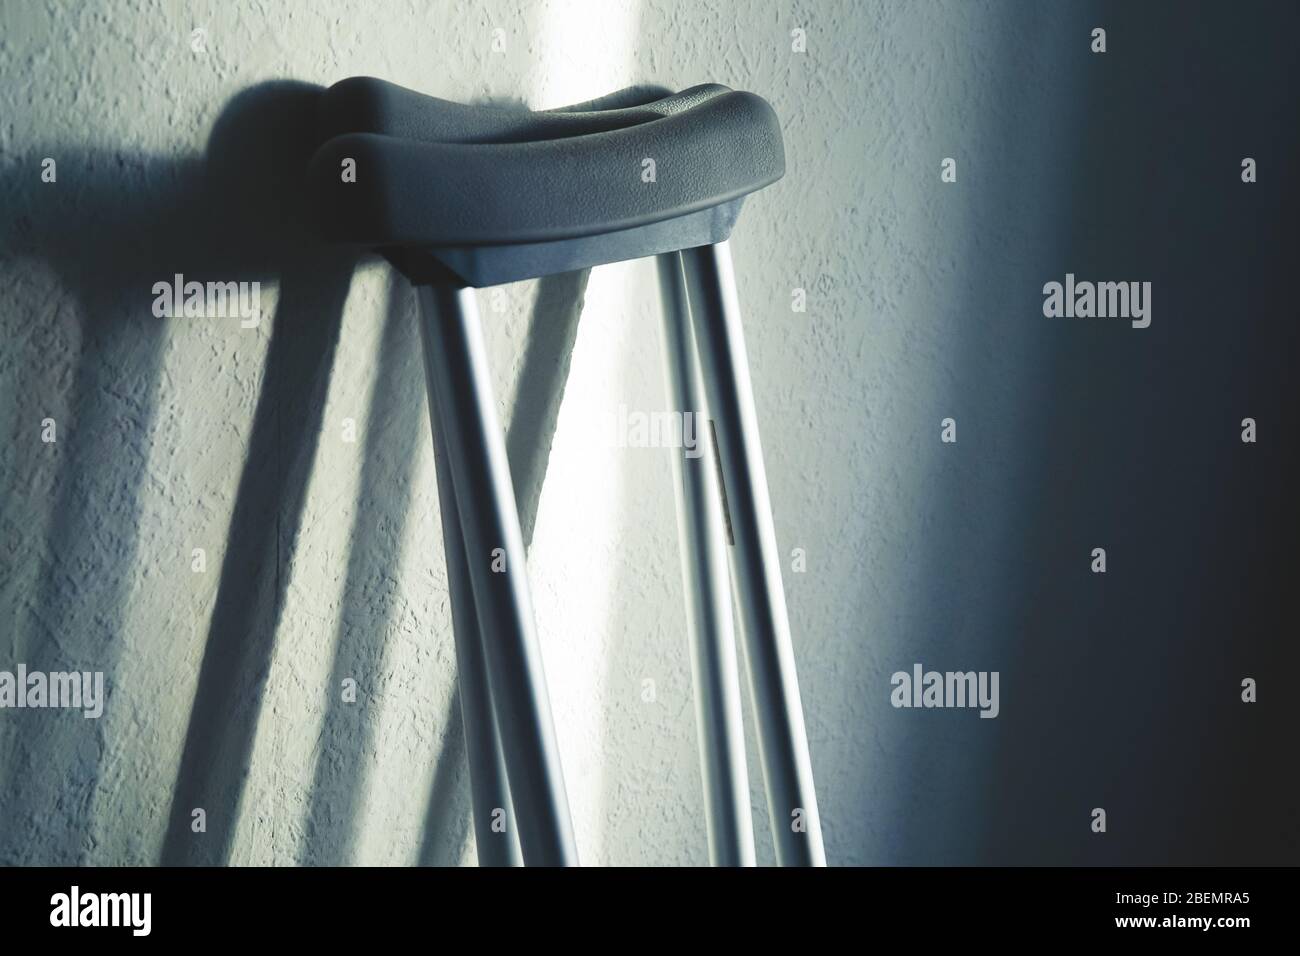 Close up image of crutches are standing against the wall. Place for text. Stock Photo